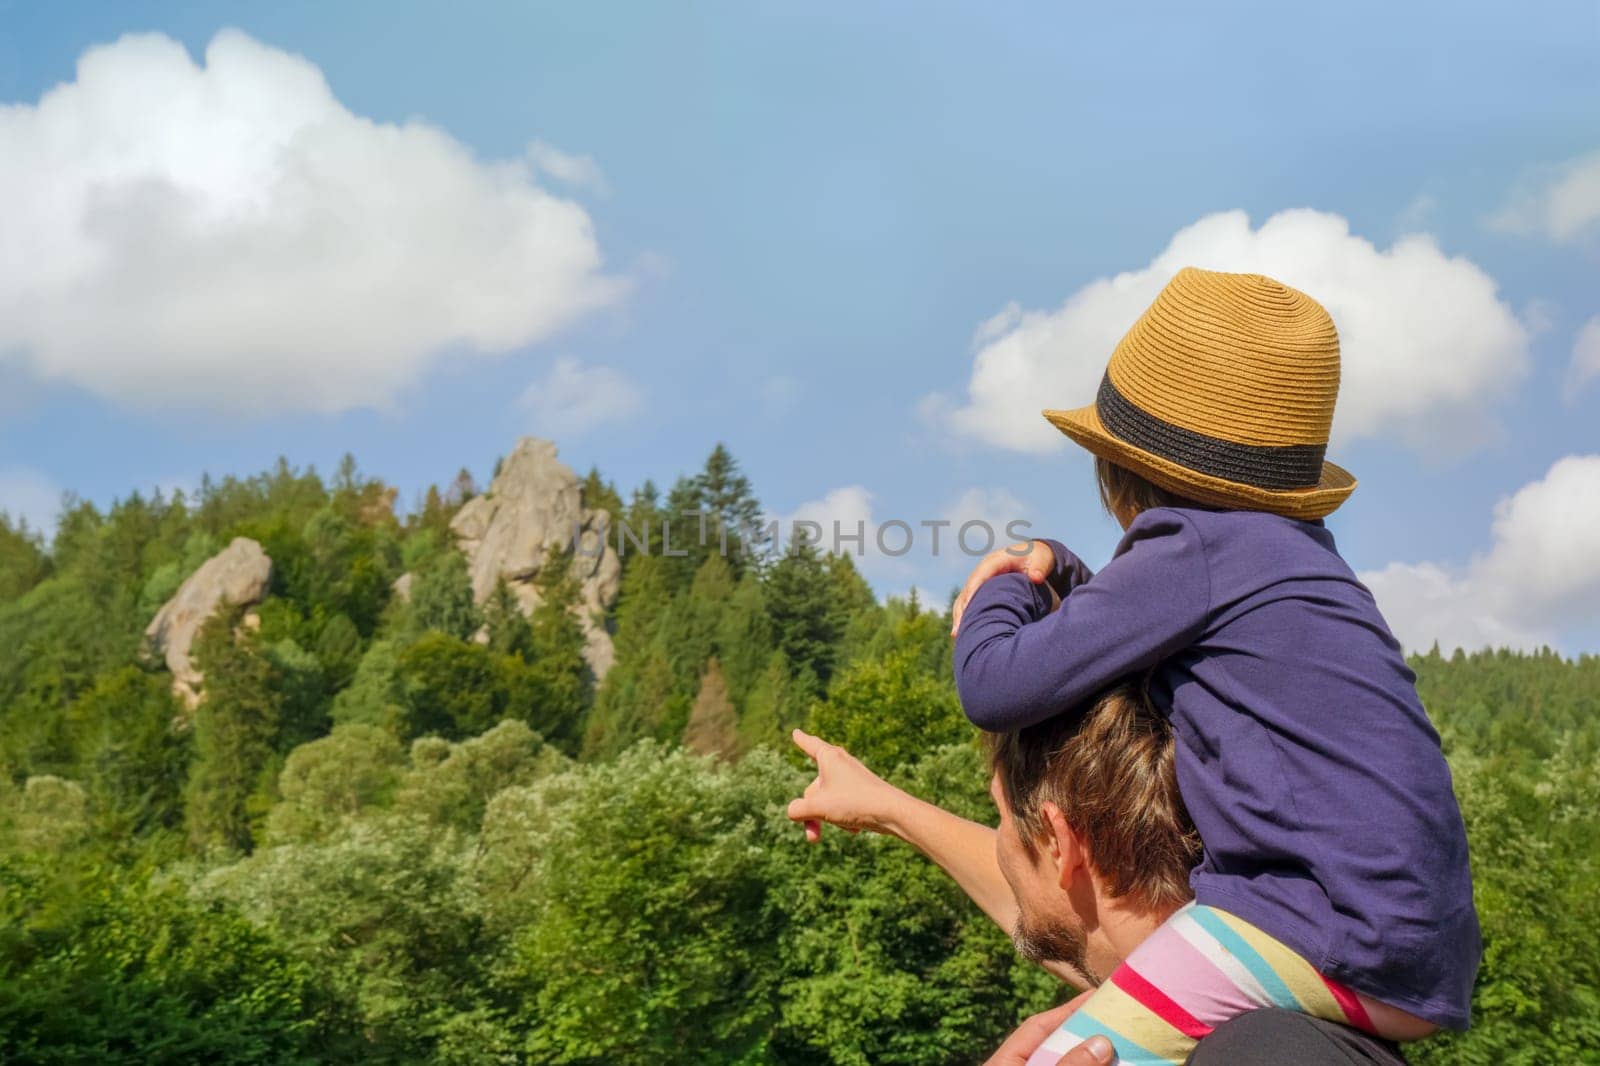 Nature child on shoulders father walking nature hiking children mountain kid hiking forest walk child adventure forest park. Nature kid on shoulders dad walking hiking adventure kid dad shoulder ride